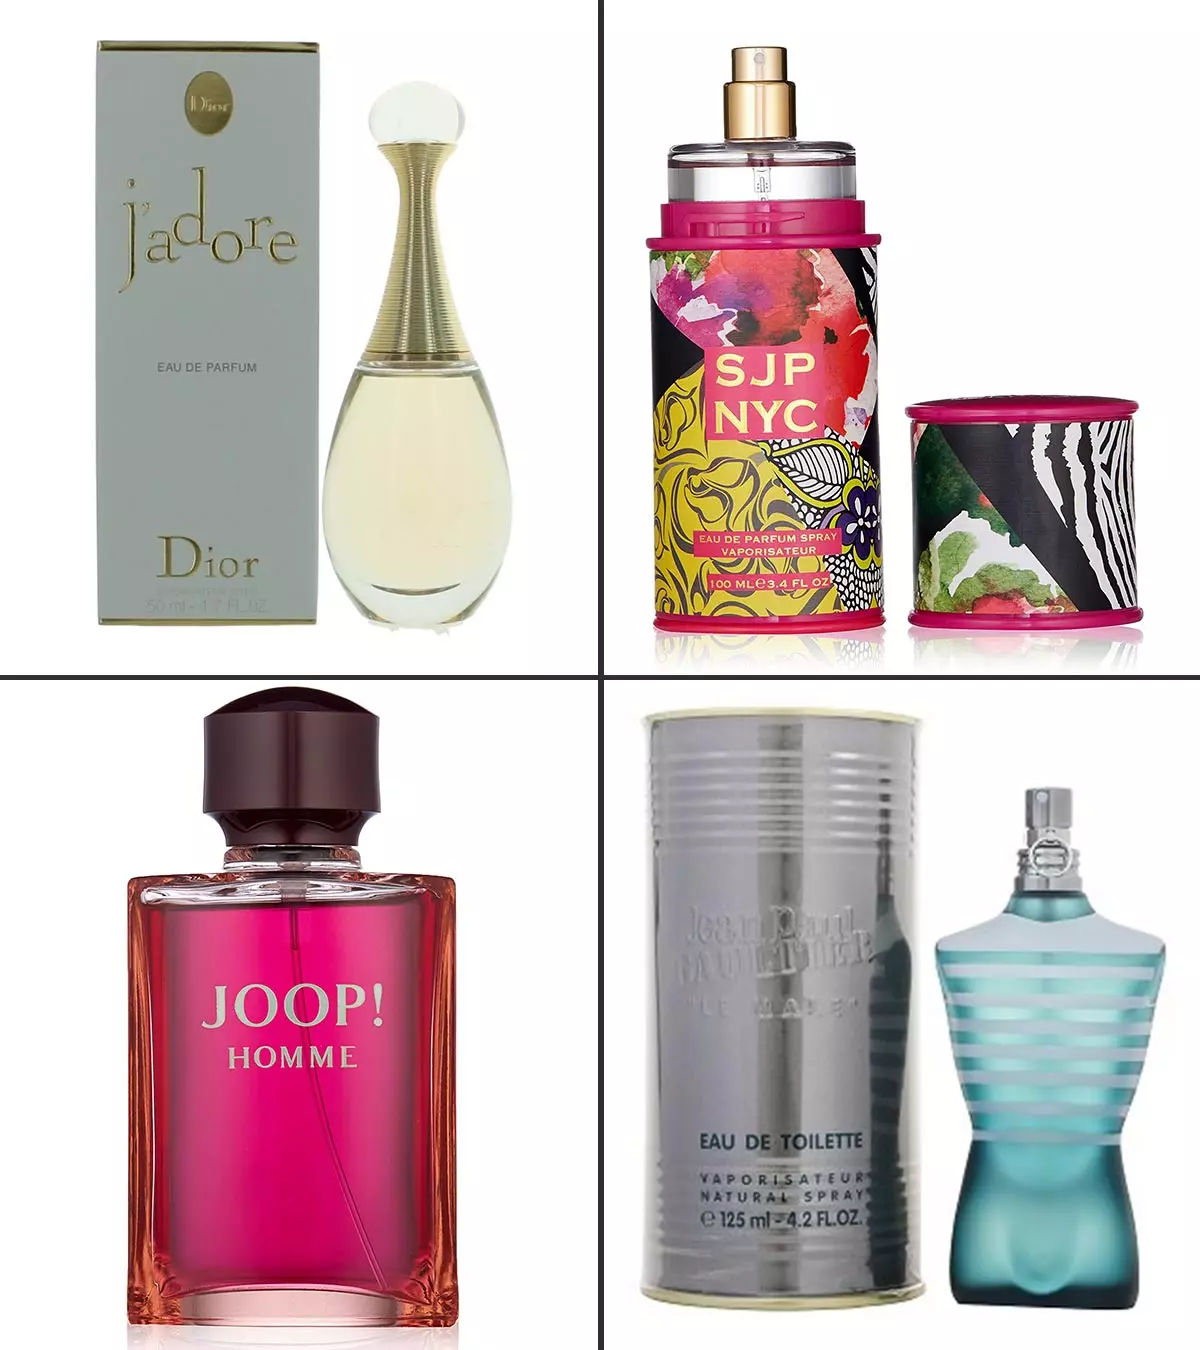 21 Best Perfumes For Teens in 2019